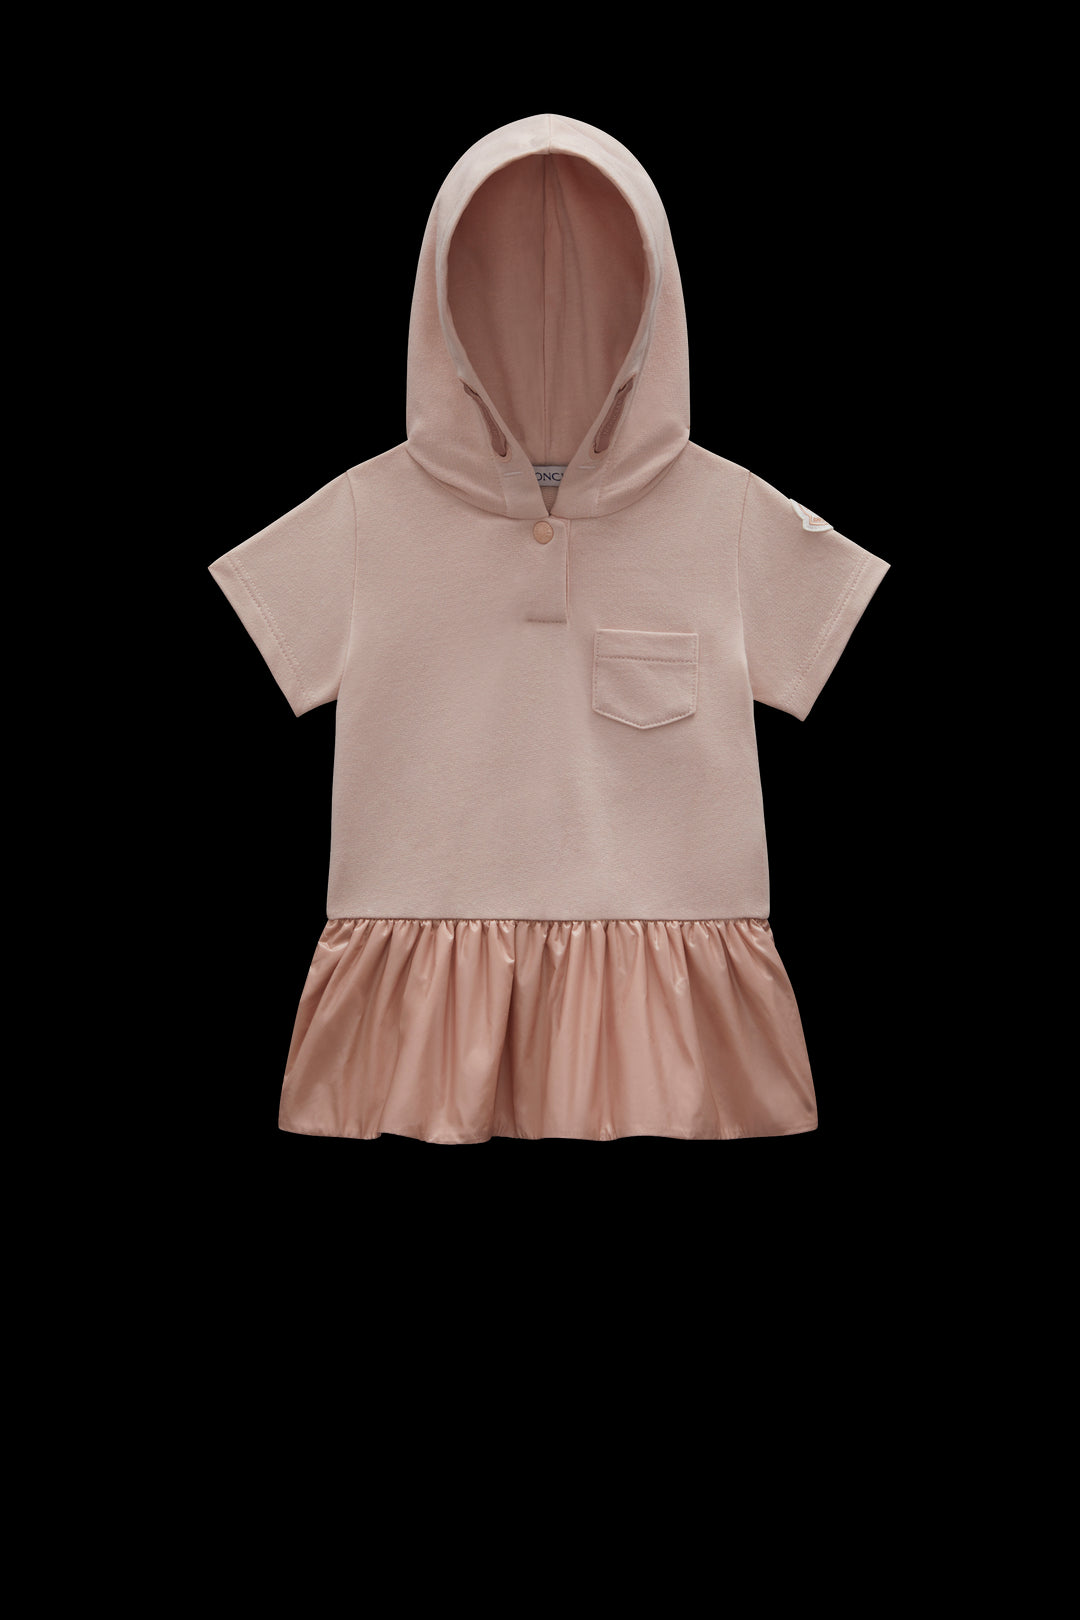 moncler-baby-girl-pink-hooded-sweater-dress-H1-951-8I000-04-899AR-514